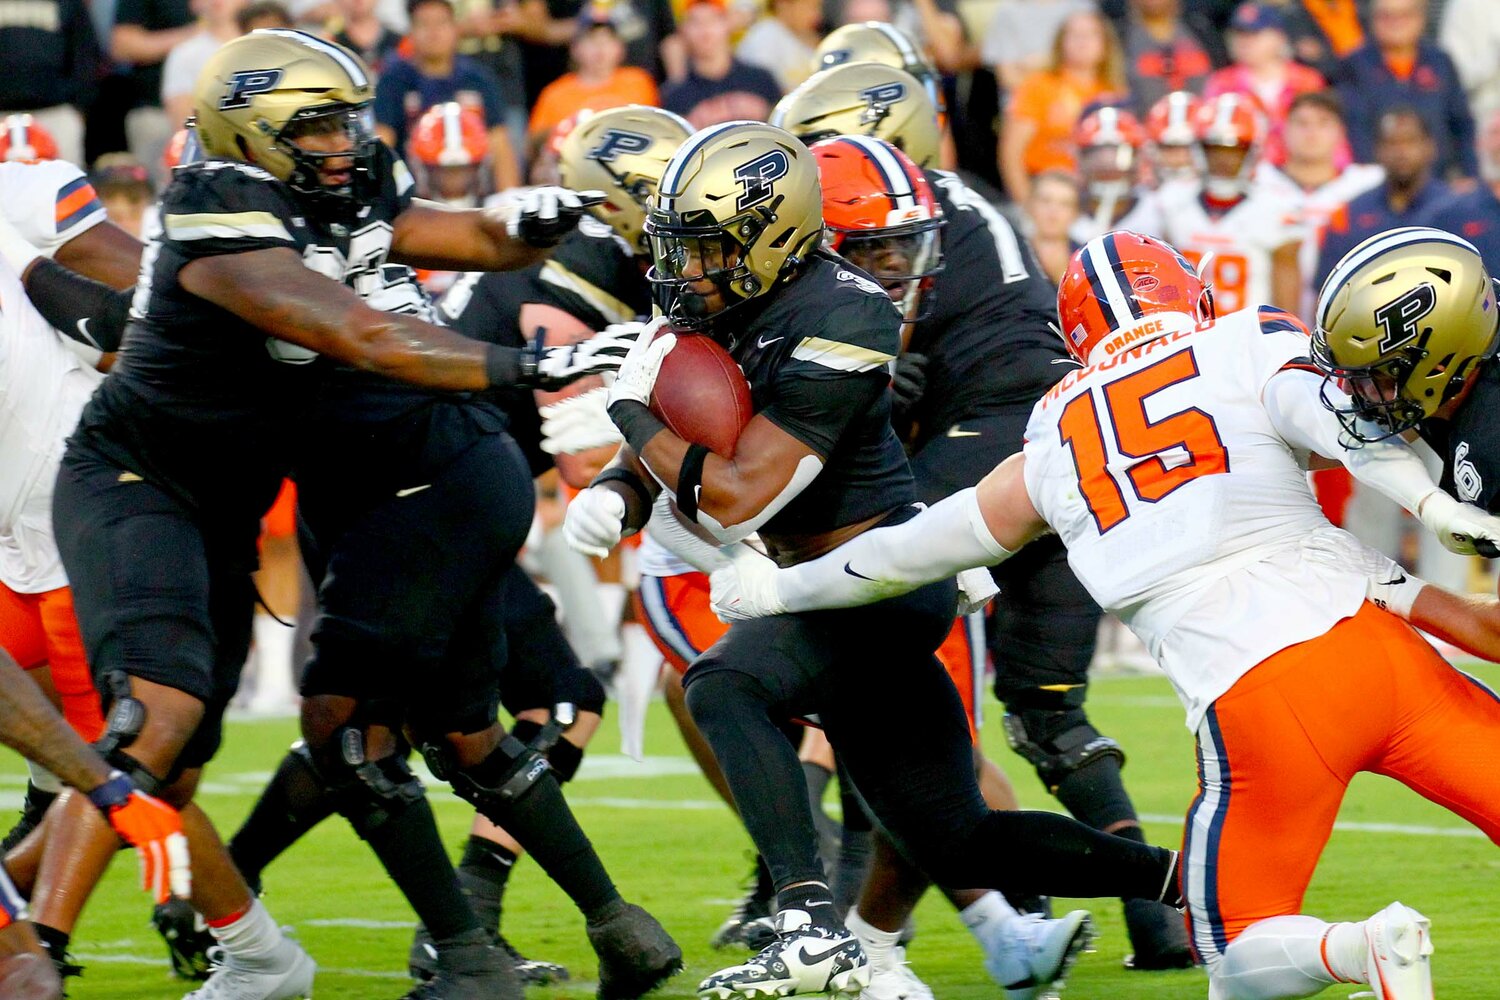 Tyrone Tracy of Purdue - running through a hole for a 9-yard gain